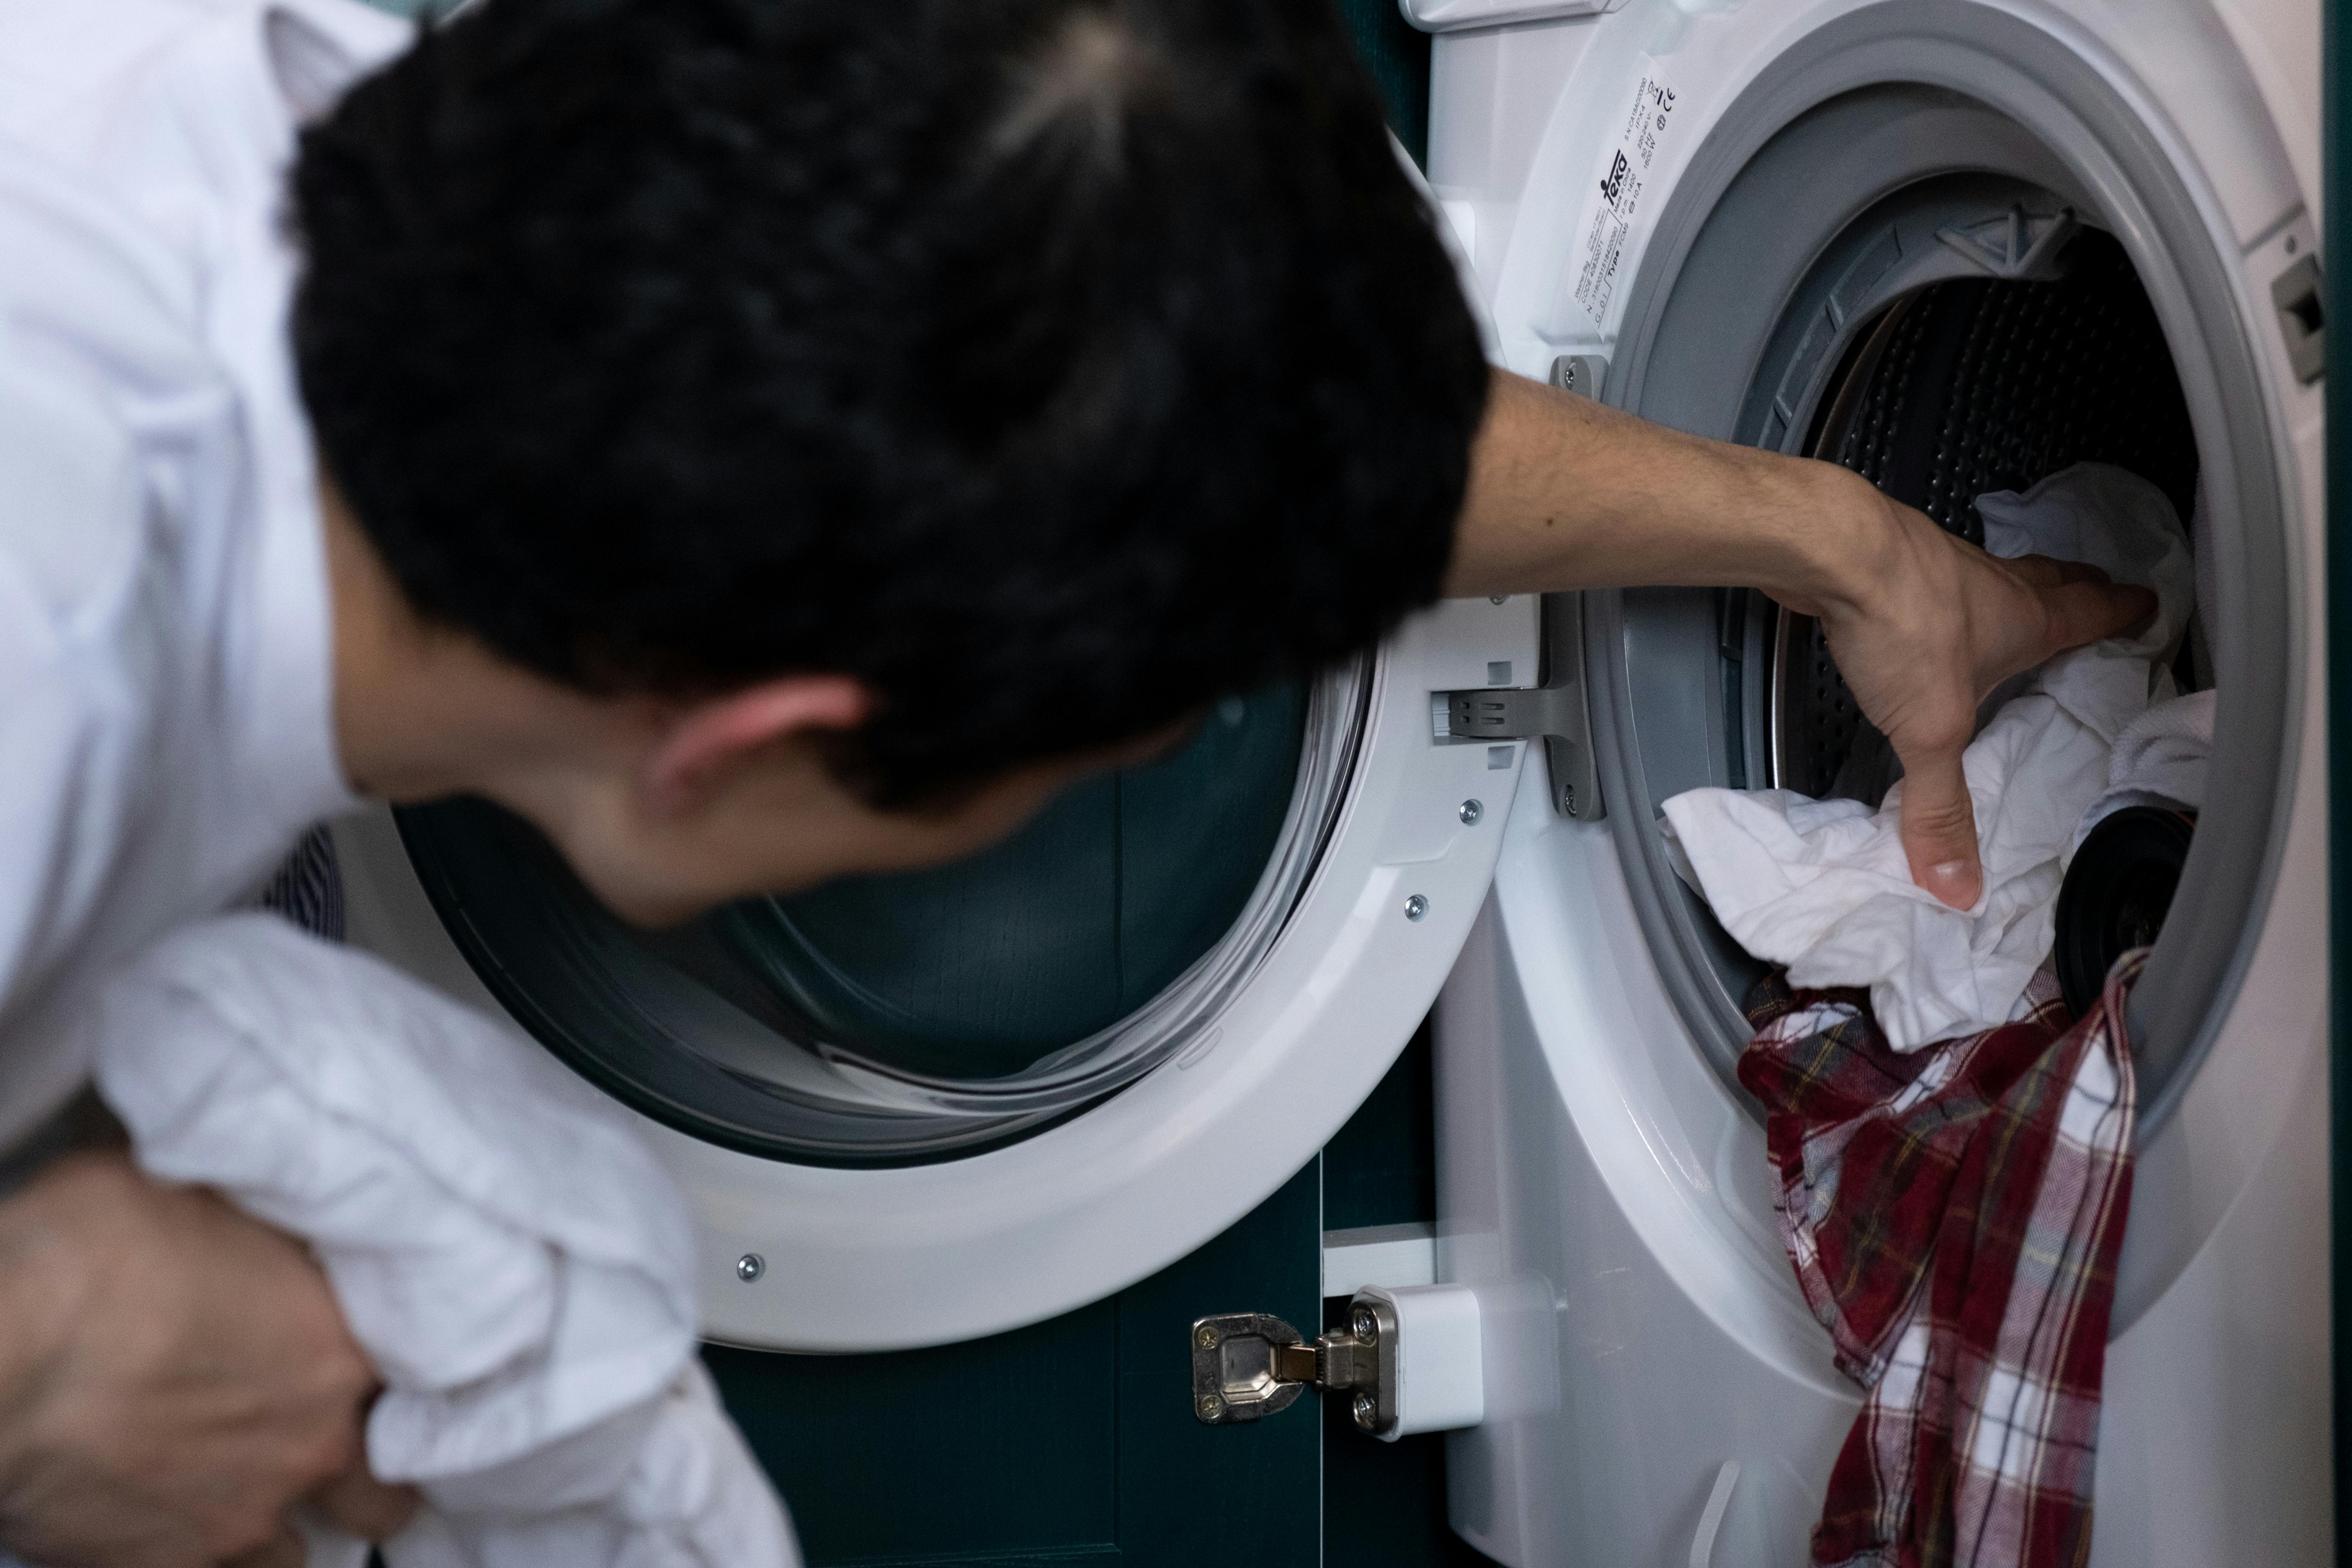 A man putting clothes into a washing machine | Source: Pexels